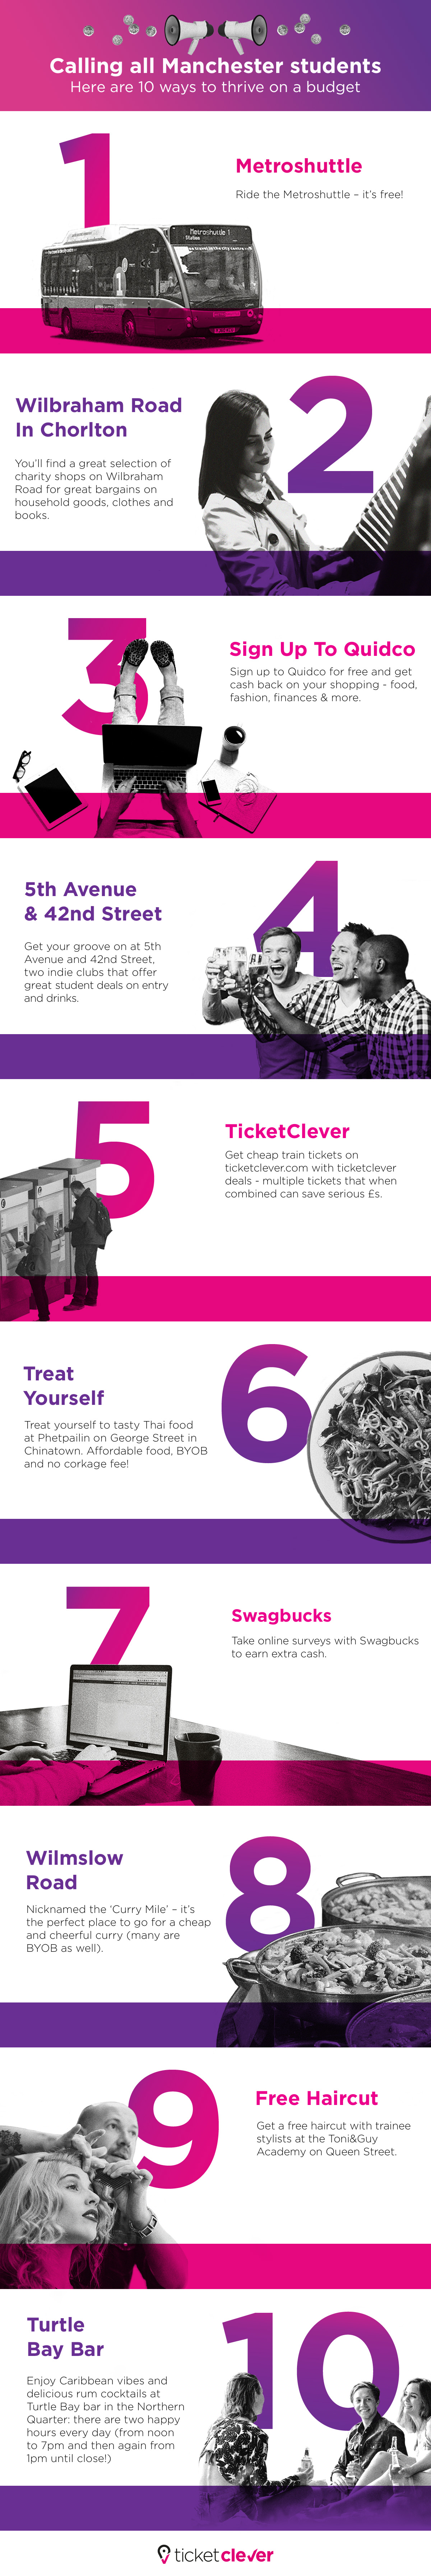 Ticketclever_studentsave_Manchester